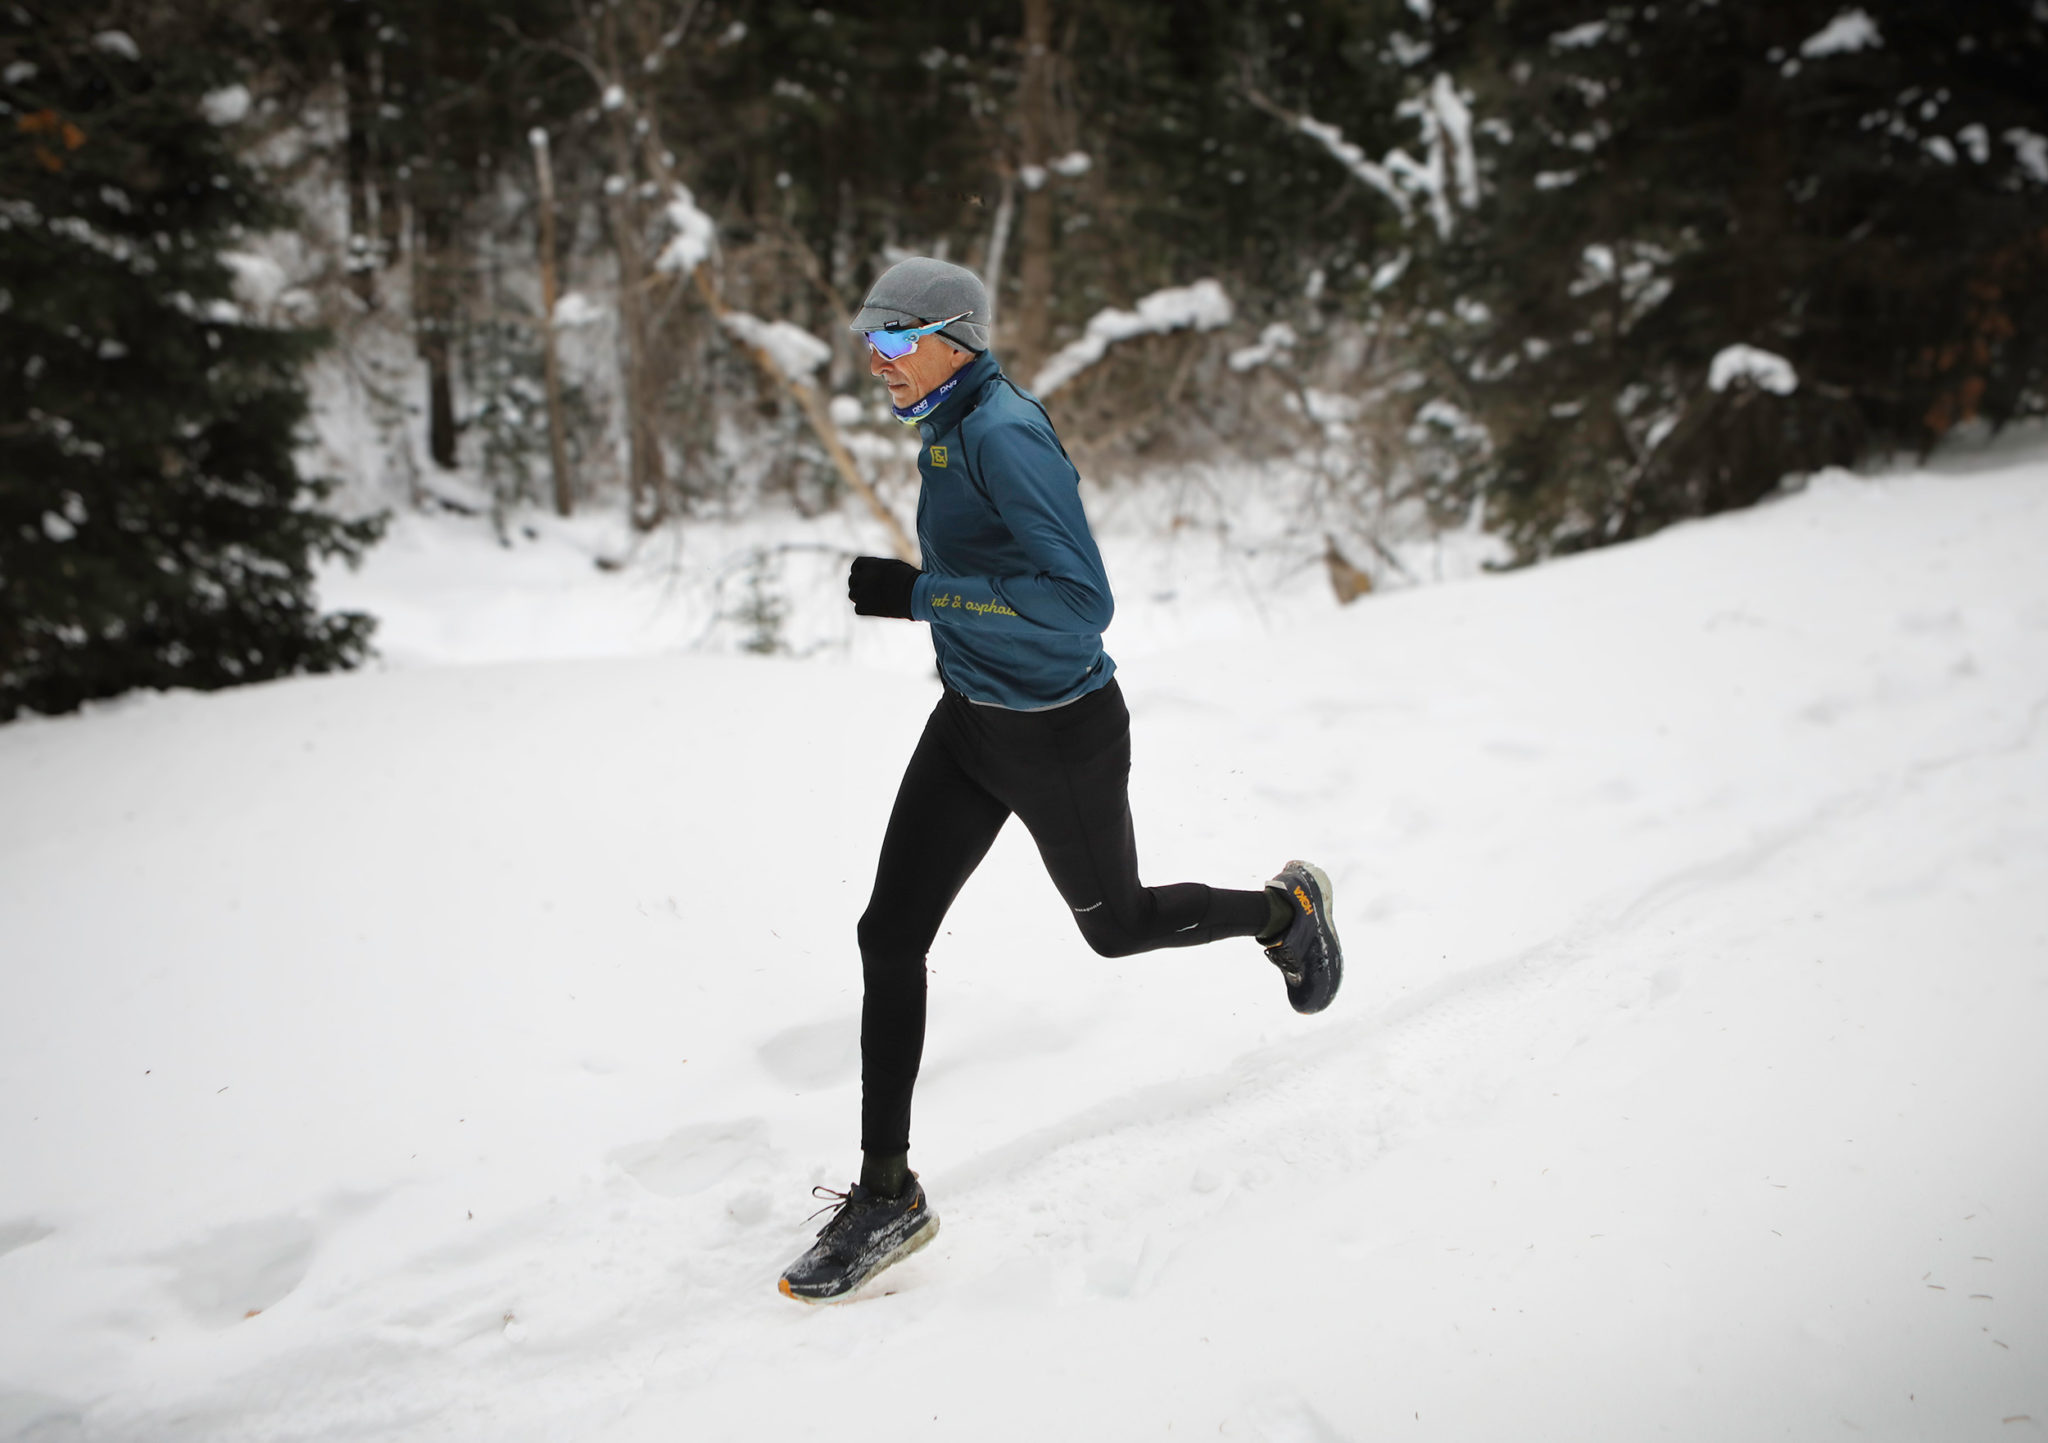 trail running in snow with dna clothing on